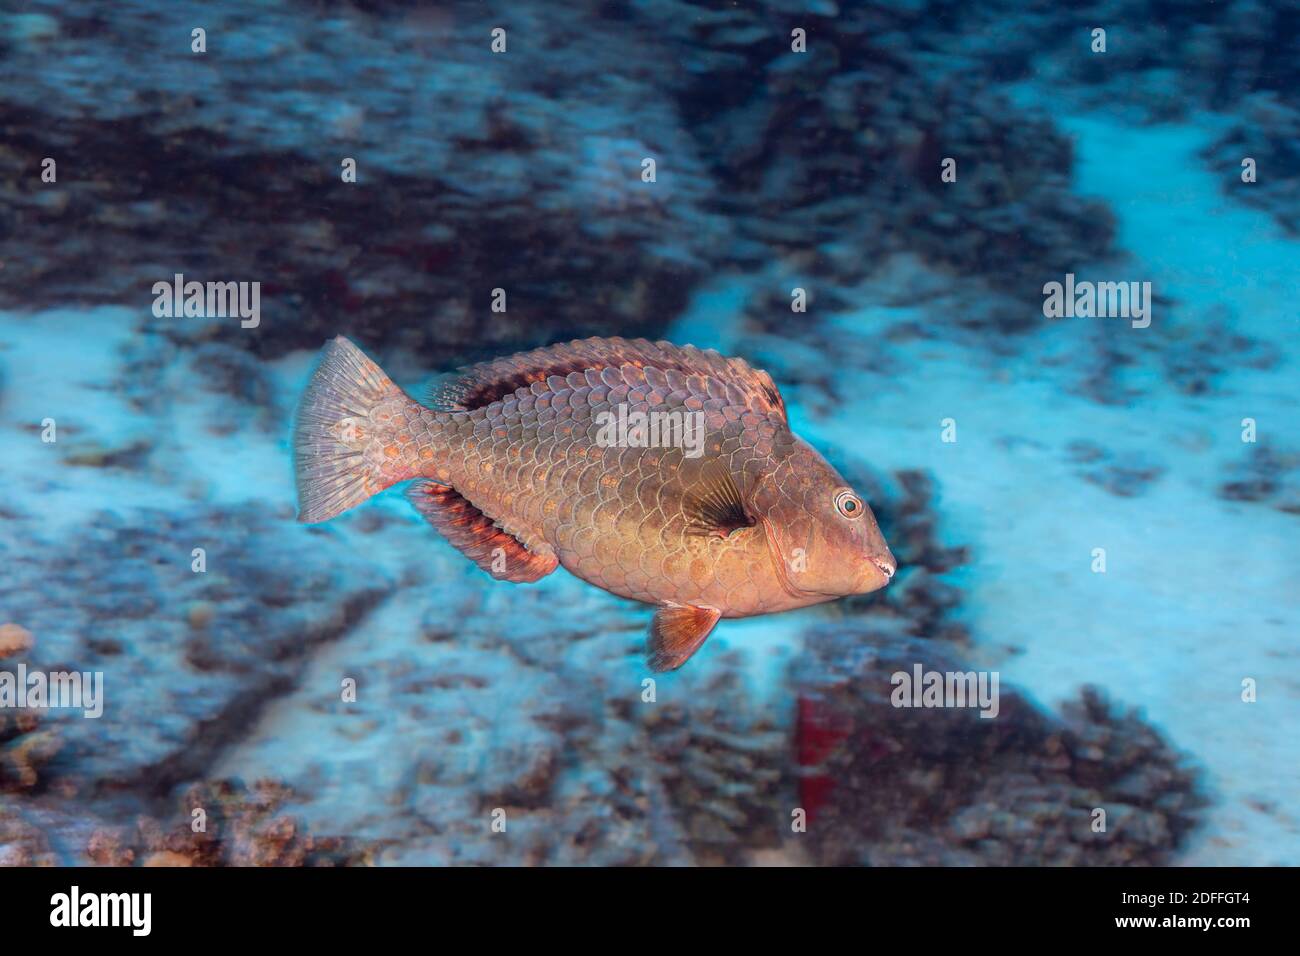 This stareye parrotfish, Calotomus carolinus, represents the initial phase of this species which could be male or female,.  Hawaii. Stock Photo